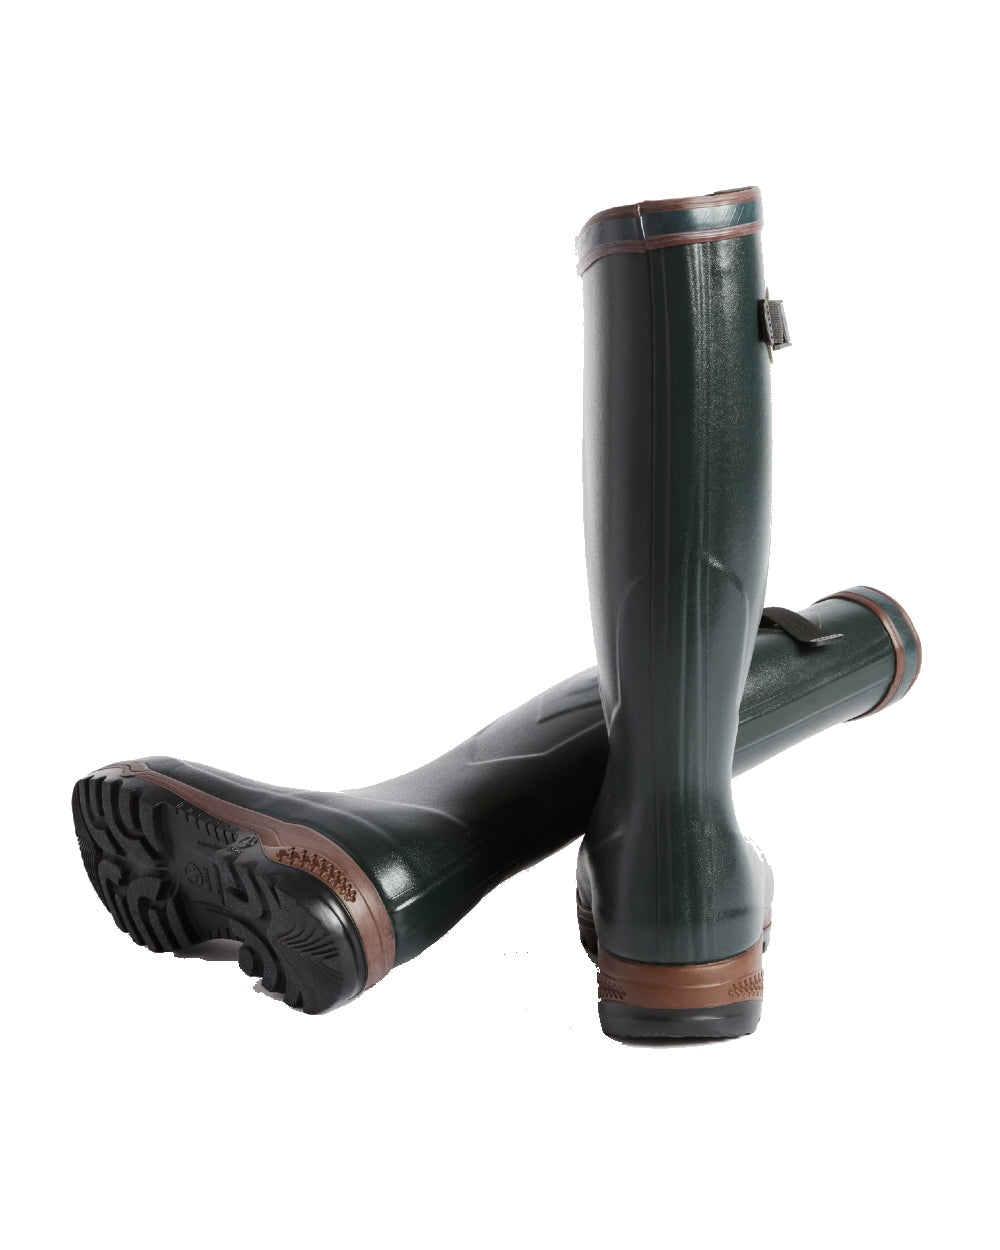 Aigle Parcours 2 ISO Wellington Boots in Bronze 